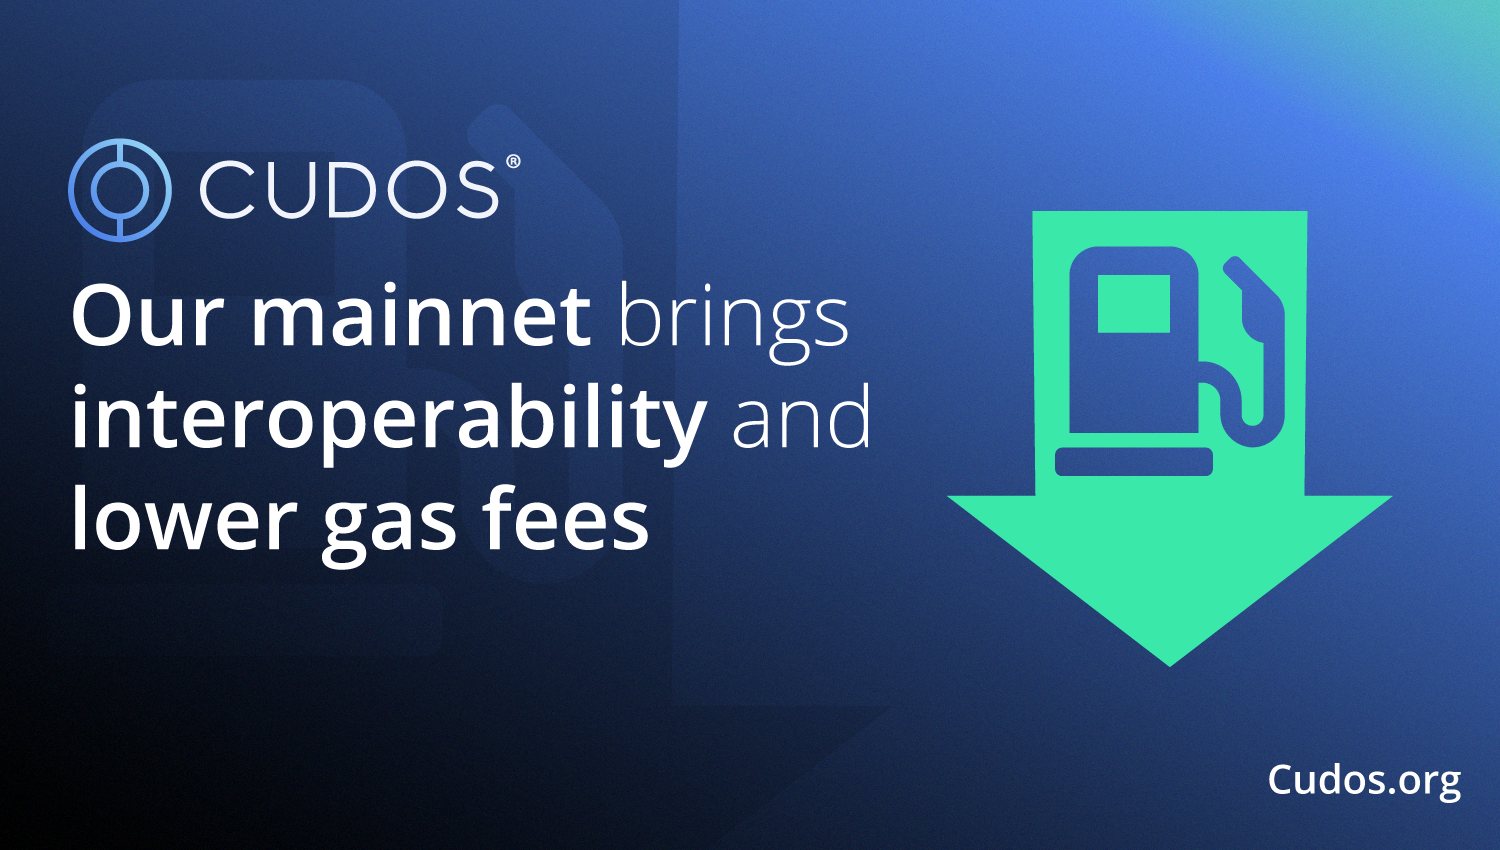 Cudos’ mainnet brings interoperability and lower gas fees